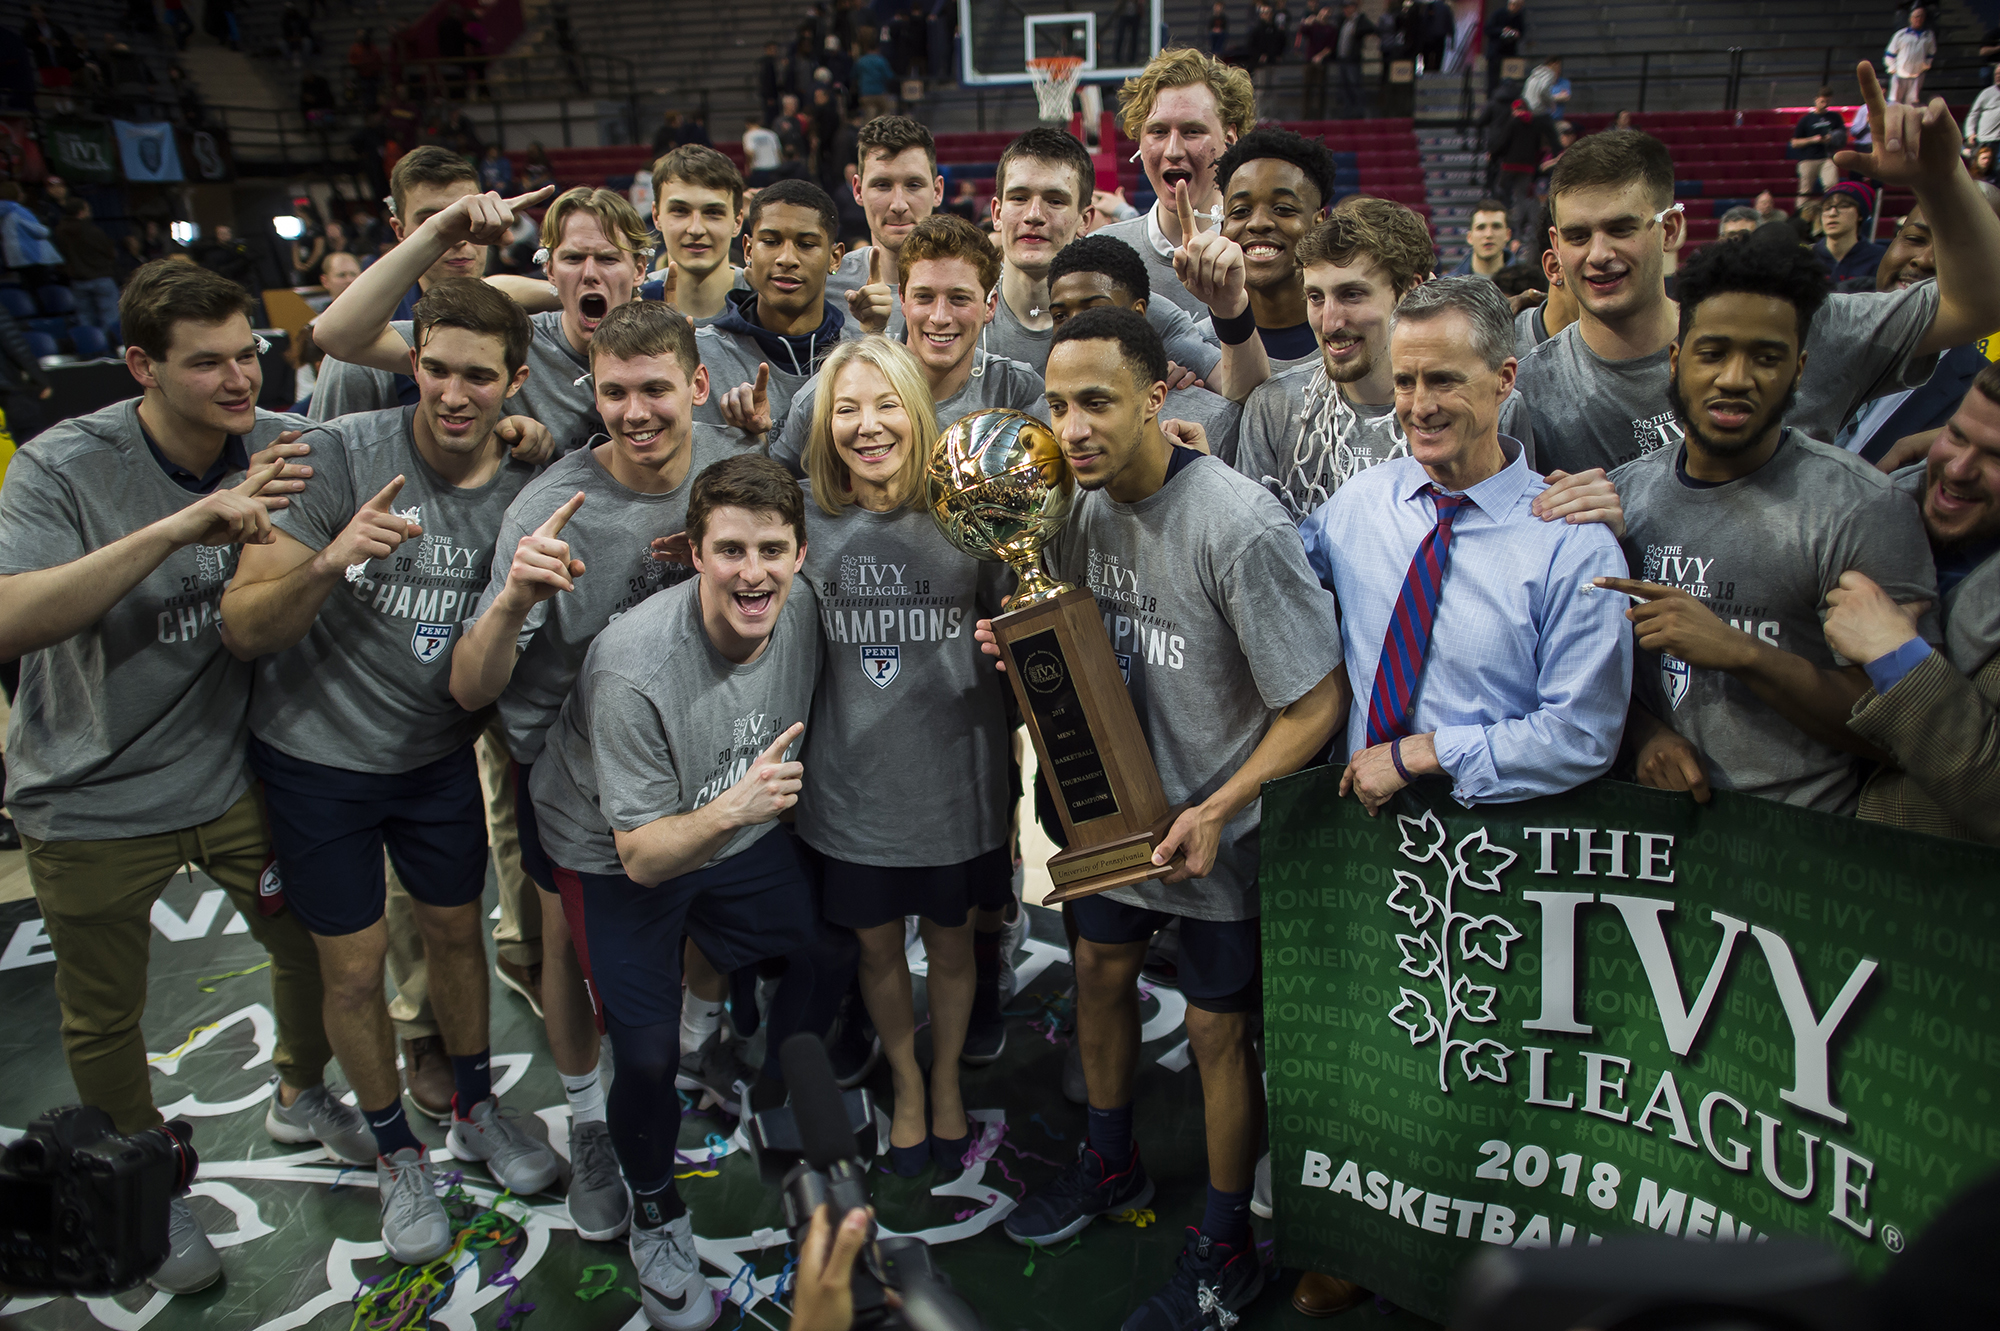 Penn President Amy Gutmann celebrates with the men’s basketball team after their victory over Harvard in the Ivy League Tournament championship game on Sunday, March 11.